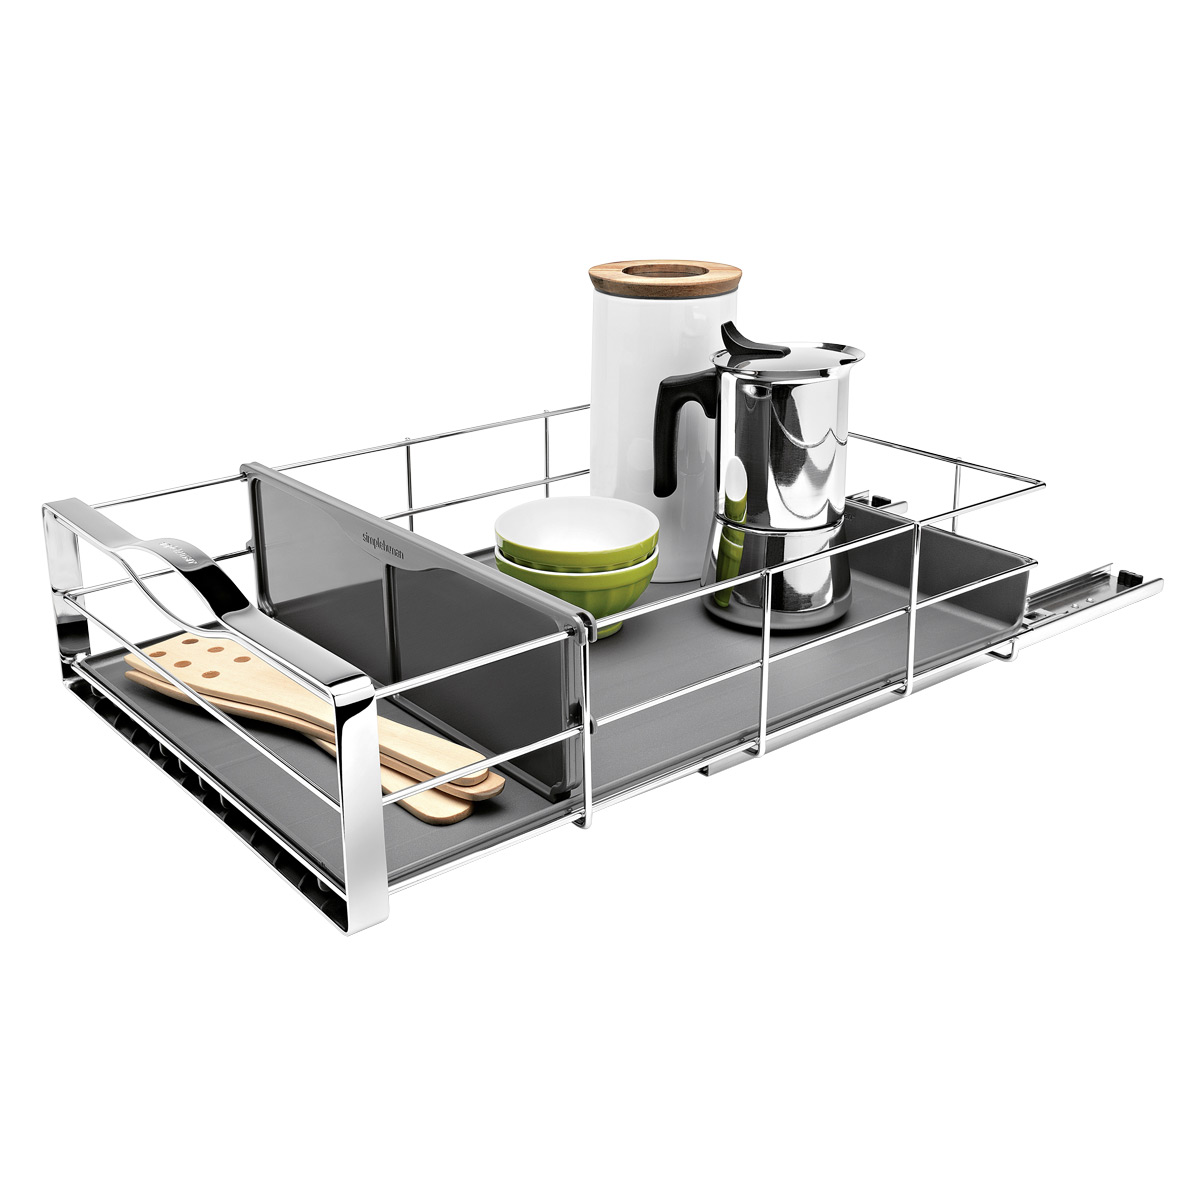 https://www.containerstore.com/catalogimages/378351/10052286-SH-Pull_Out_Cabinet_Organiz.jpg